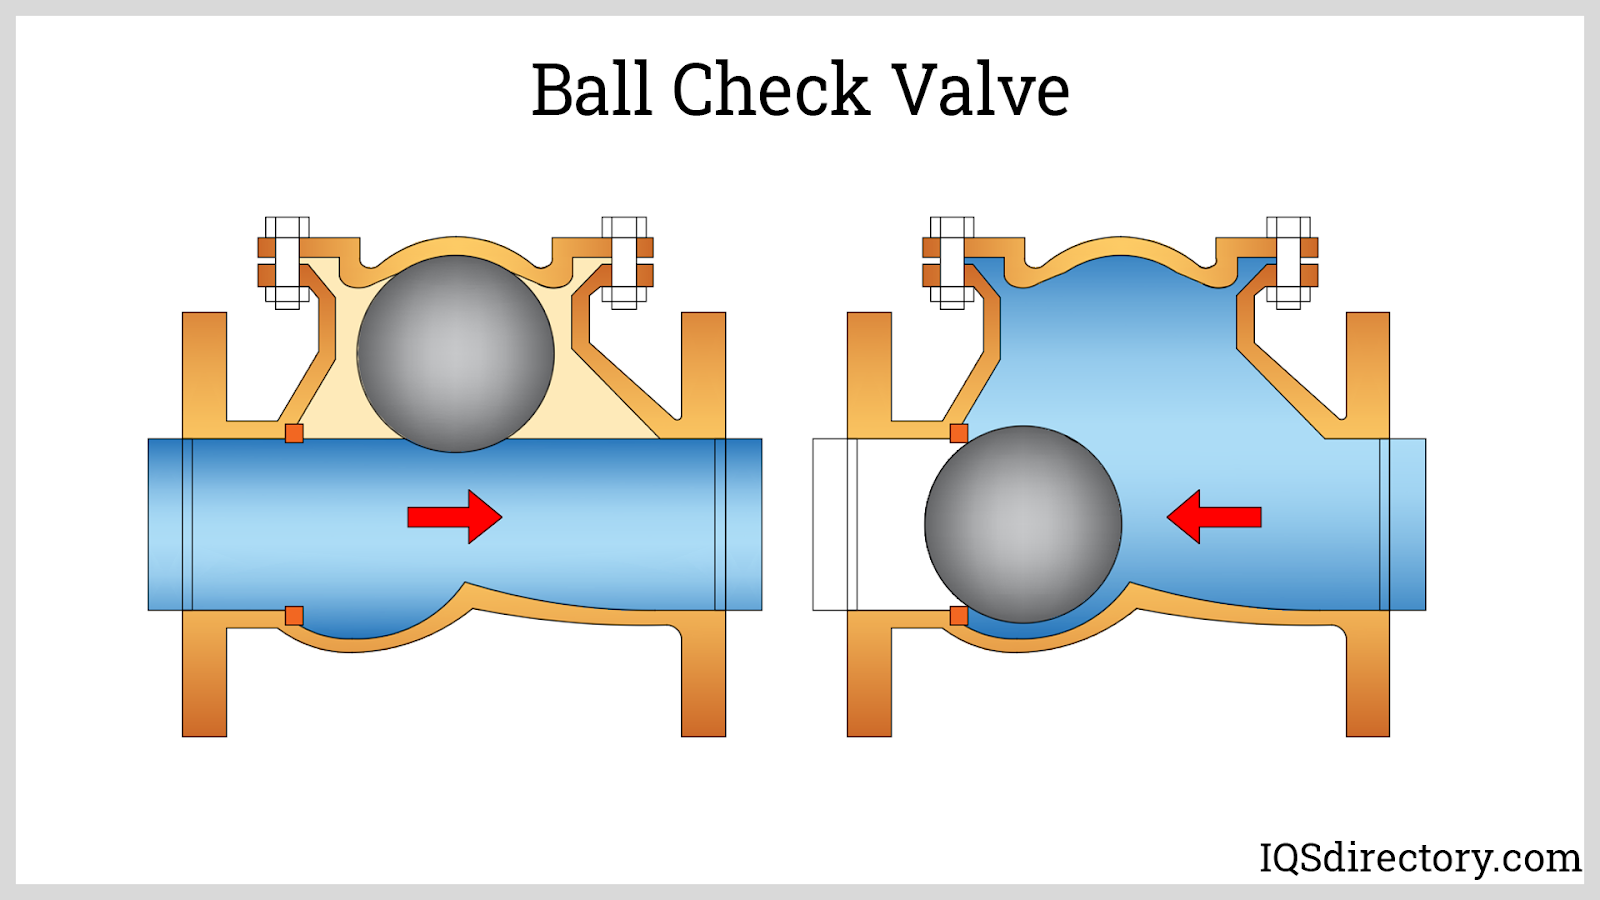 Soft Seat Ball check Valve. Valve picture. Valve what is it. Check balls